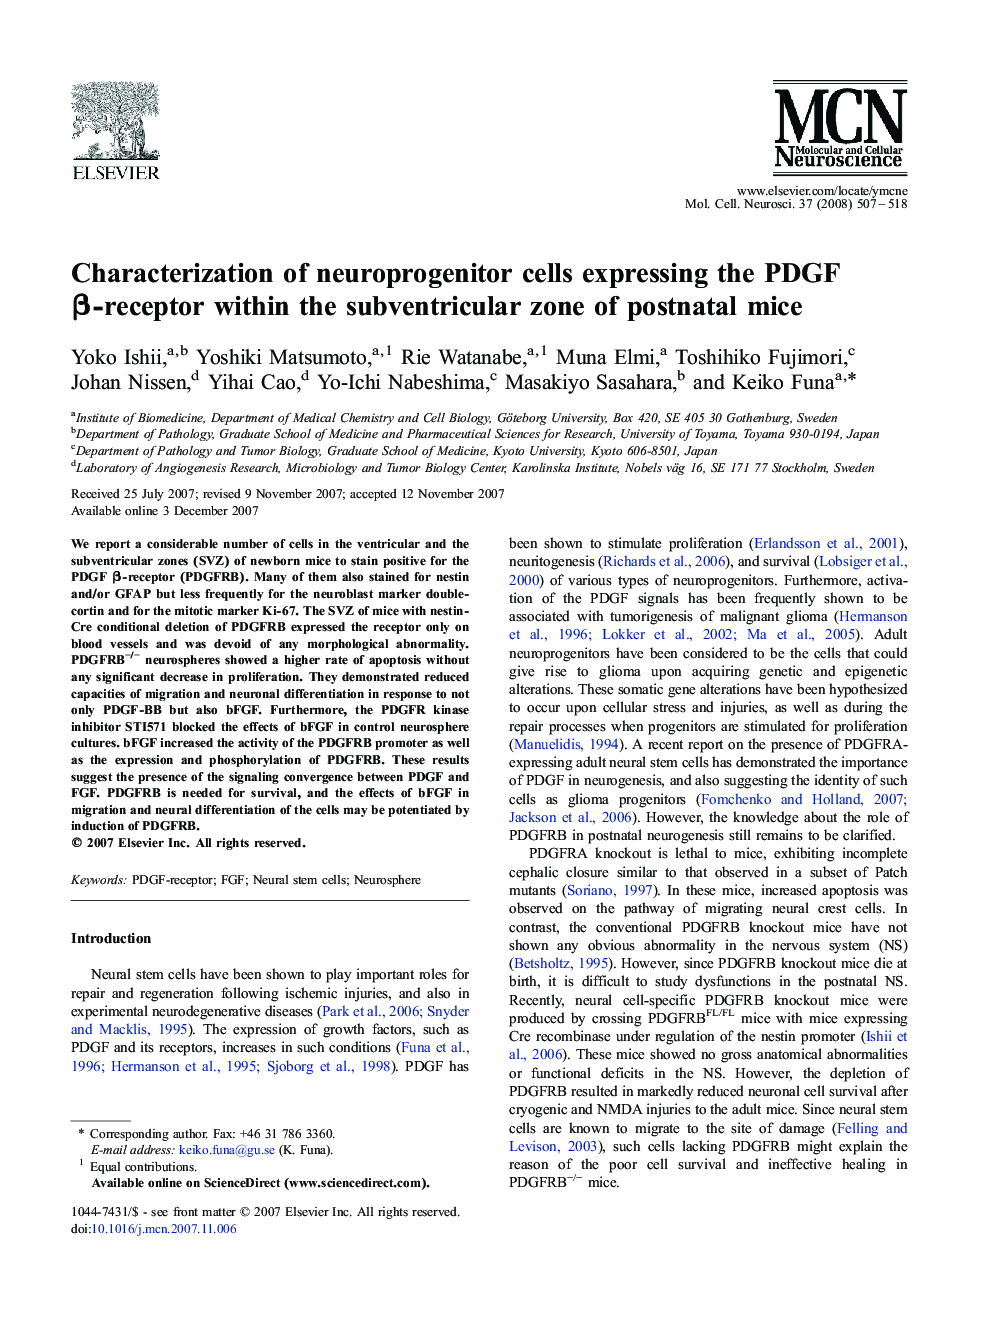 Characterization of neuroprogenitor cells expressing the PDGF β-receptor within the subventricular zone of postnatal mice